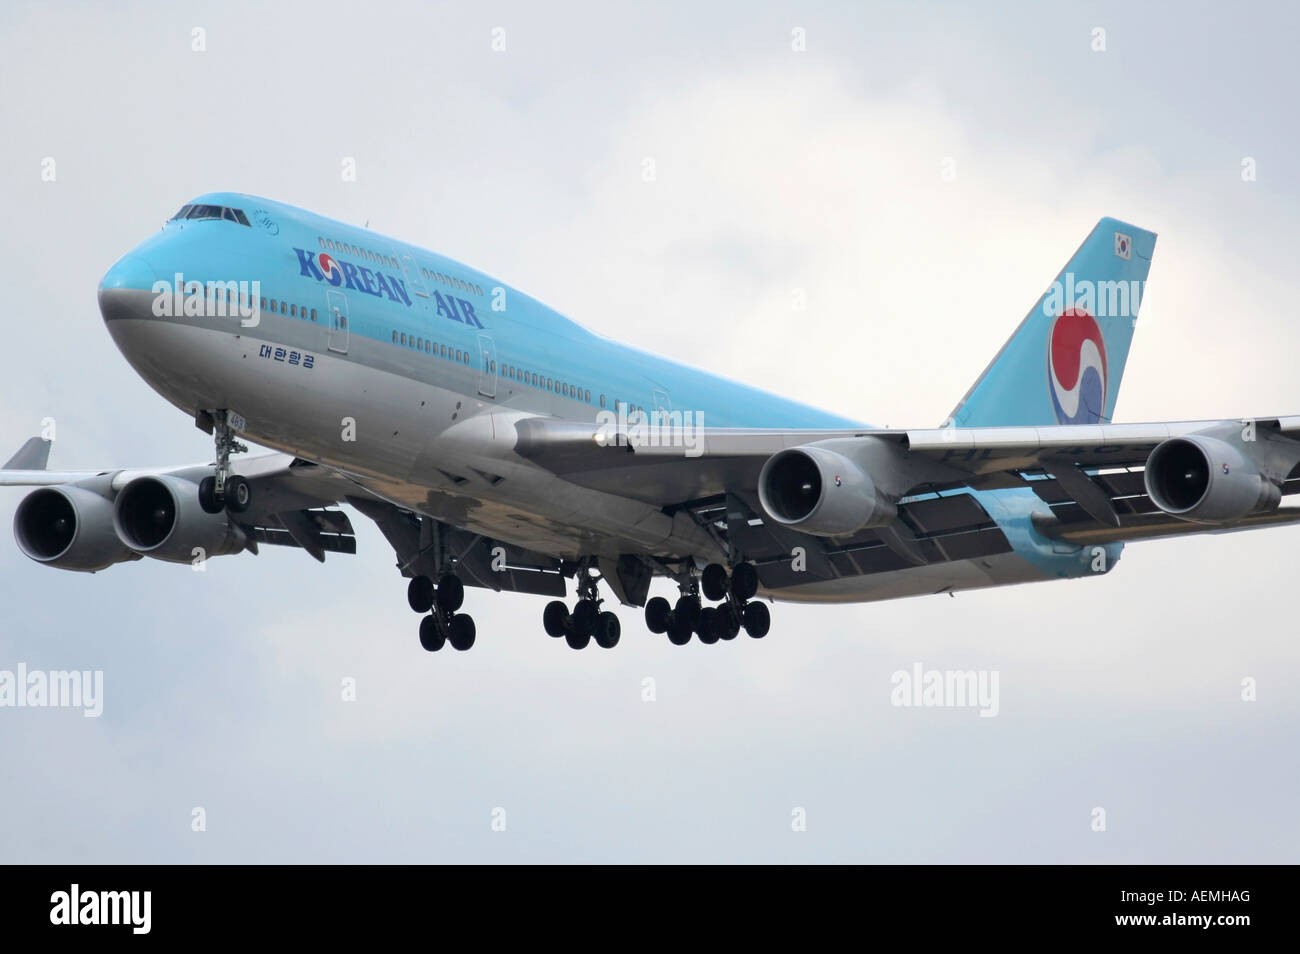 Korean Air Boeing 747-400 four engine long haul passenger aircraft flying on final approach Stock Photo